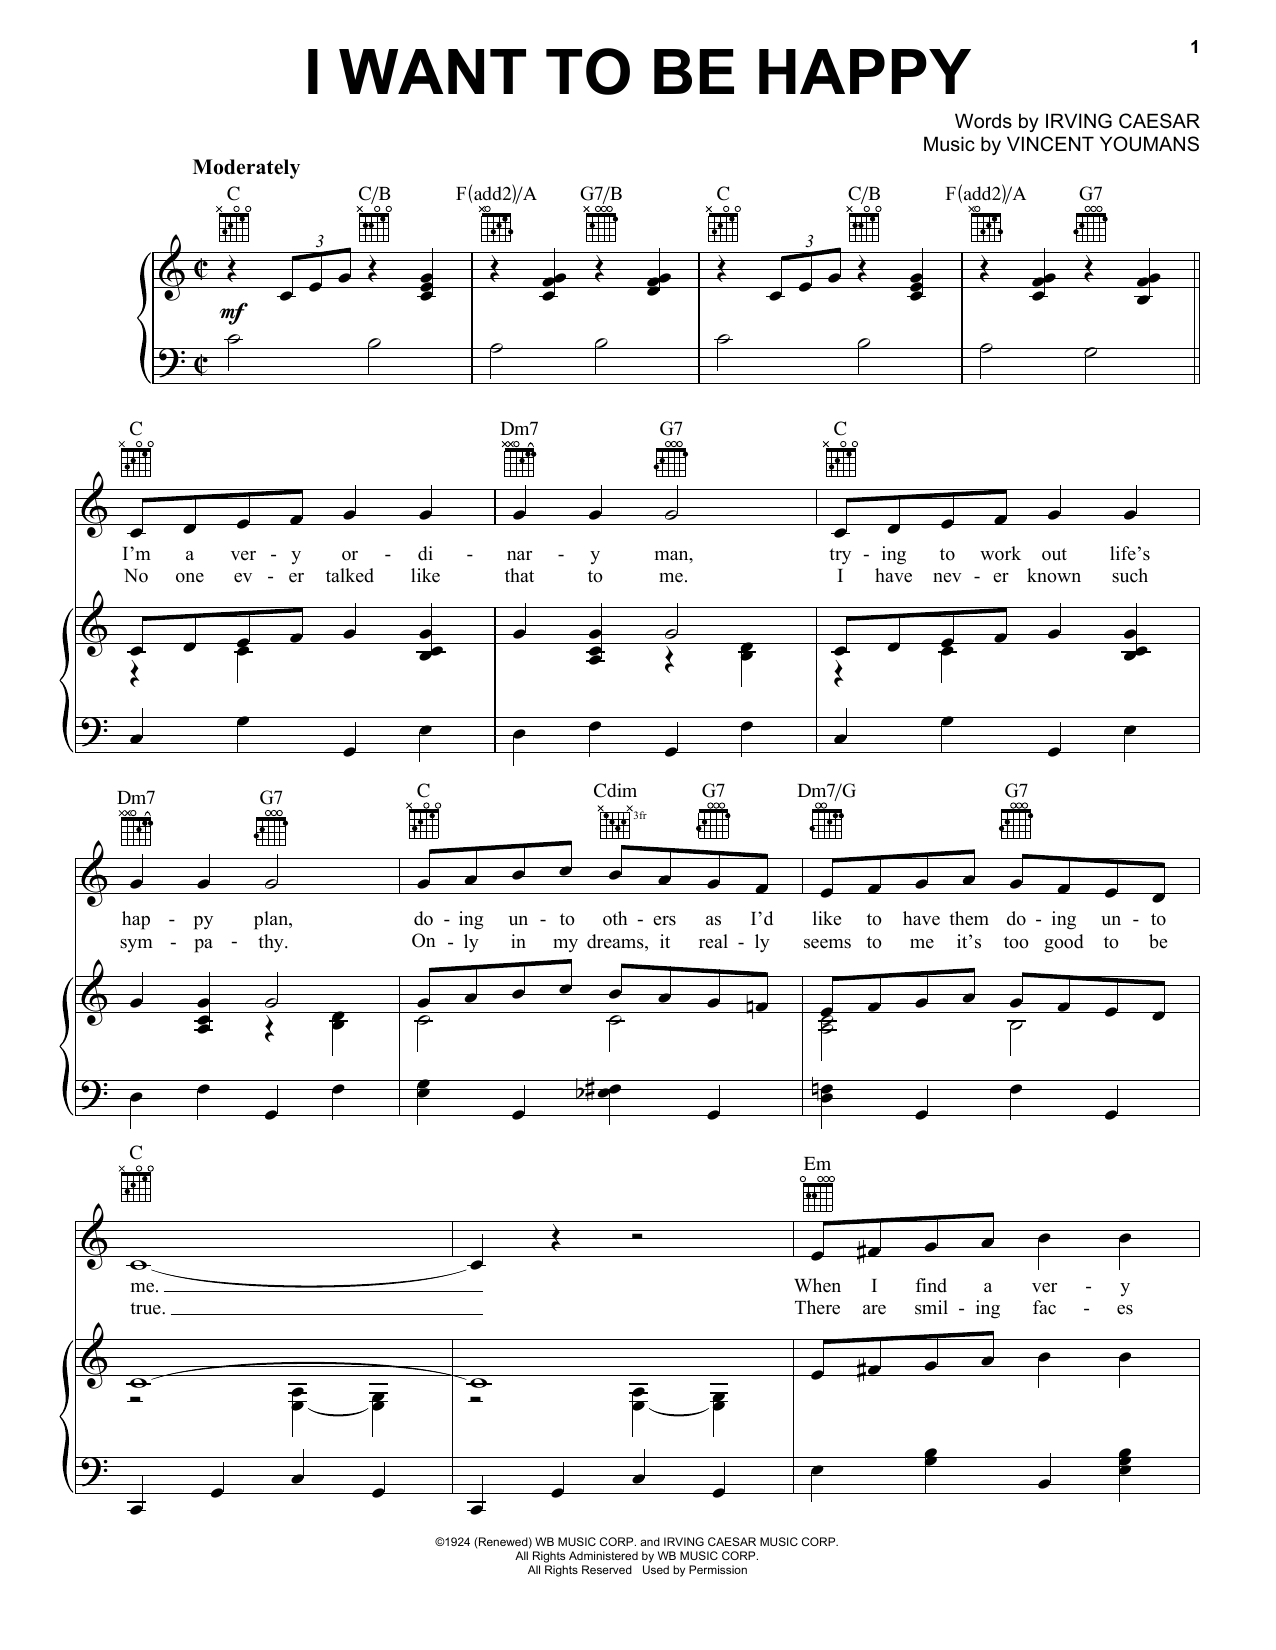 I Want To Be Happy sheet music